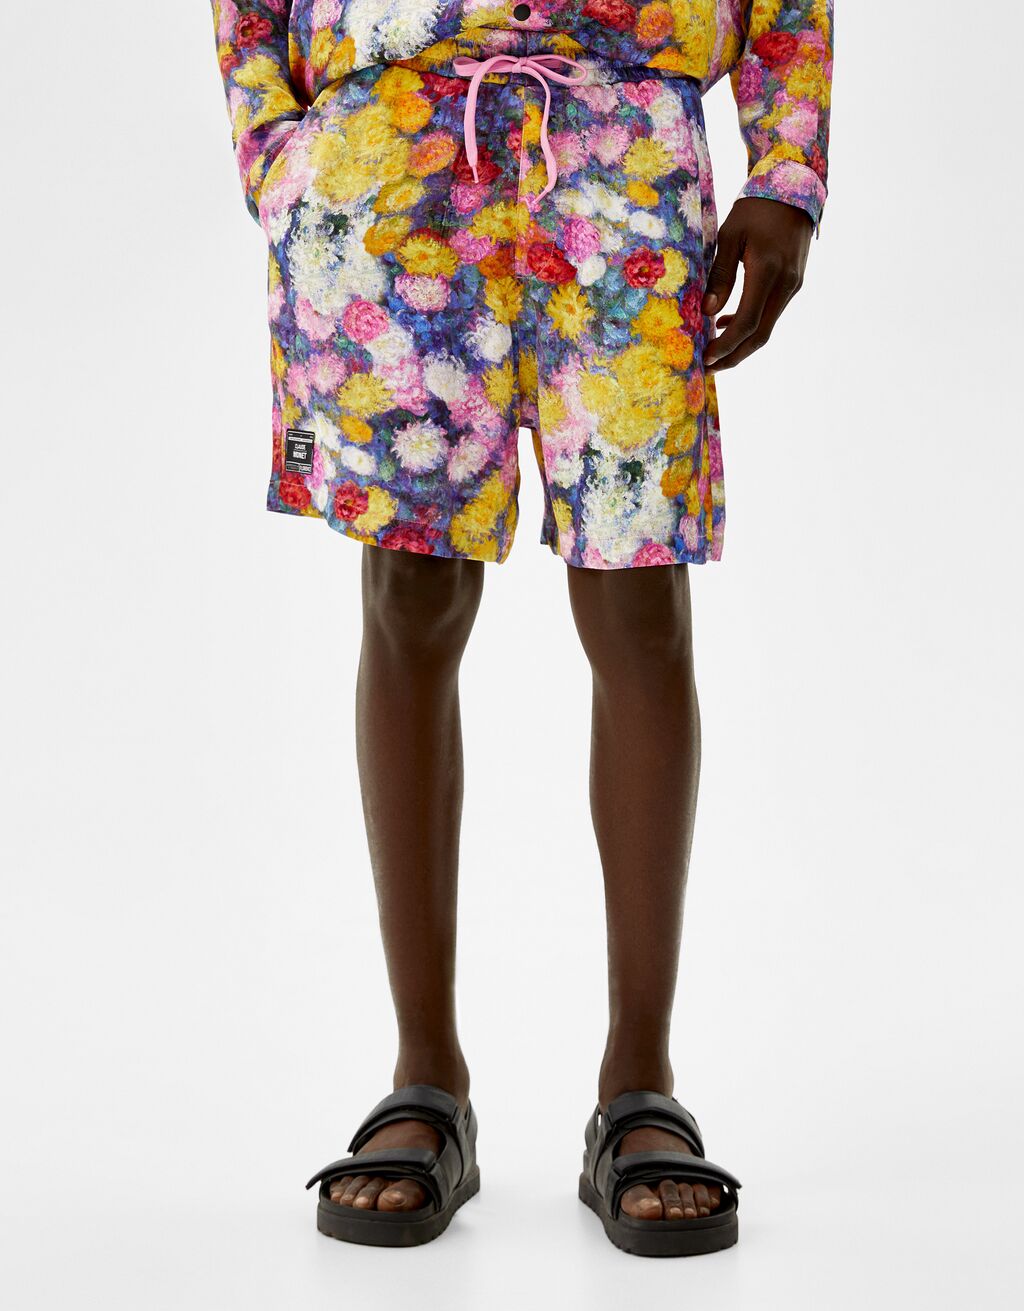 Relaxed fit Bermuda shorts with Art series print